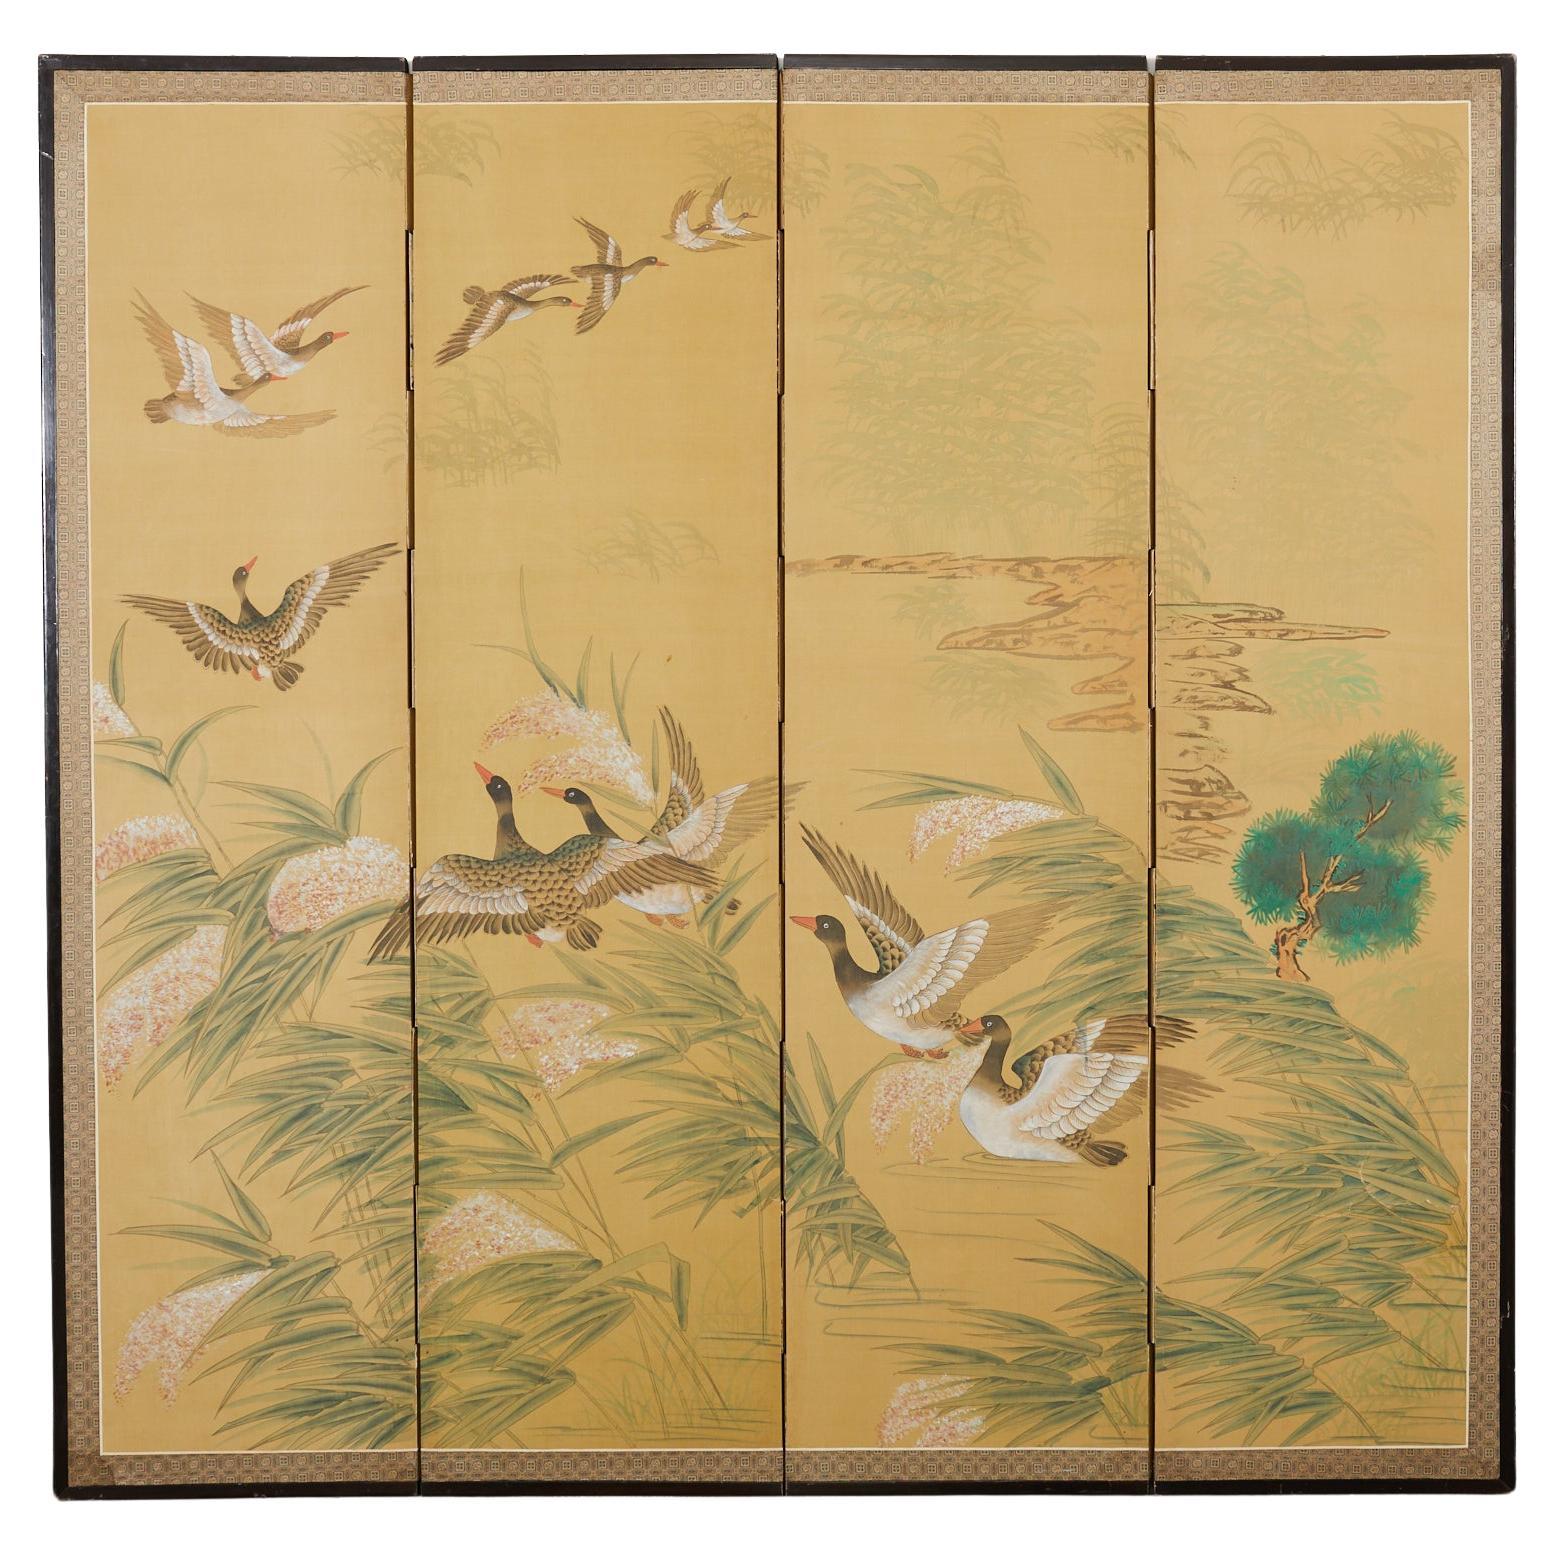 Japanese Style Four Panel Screen Geese Flight Over Reeds For Sale